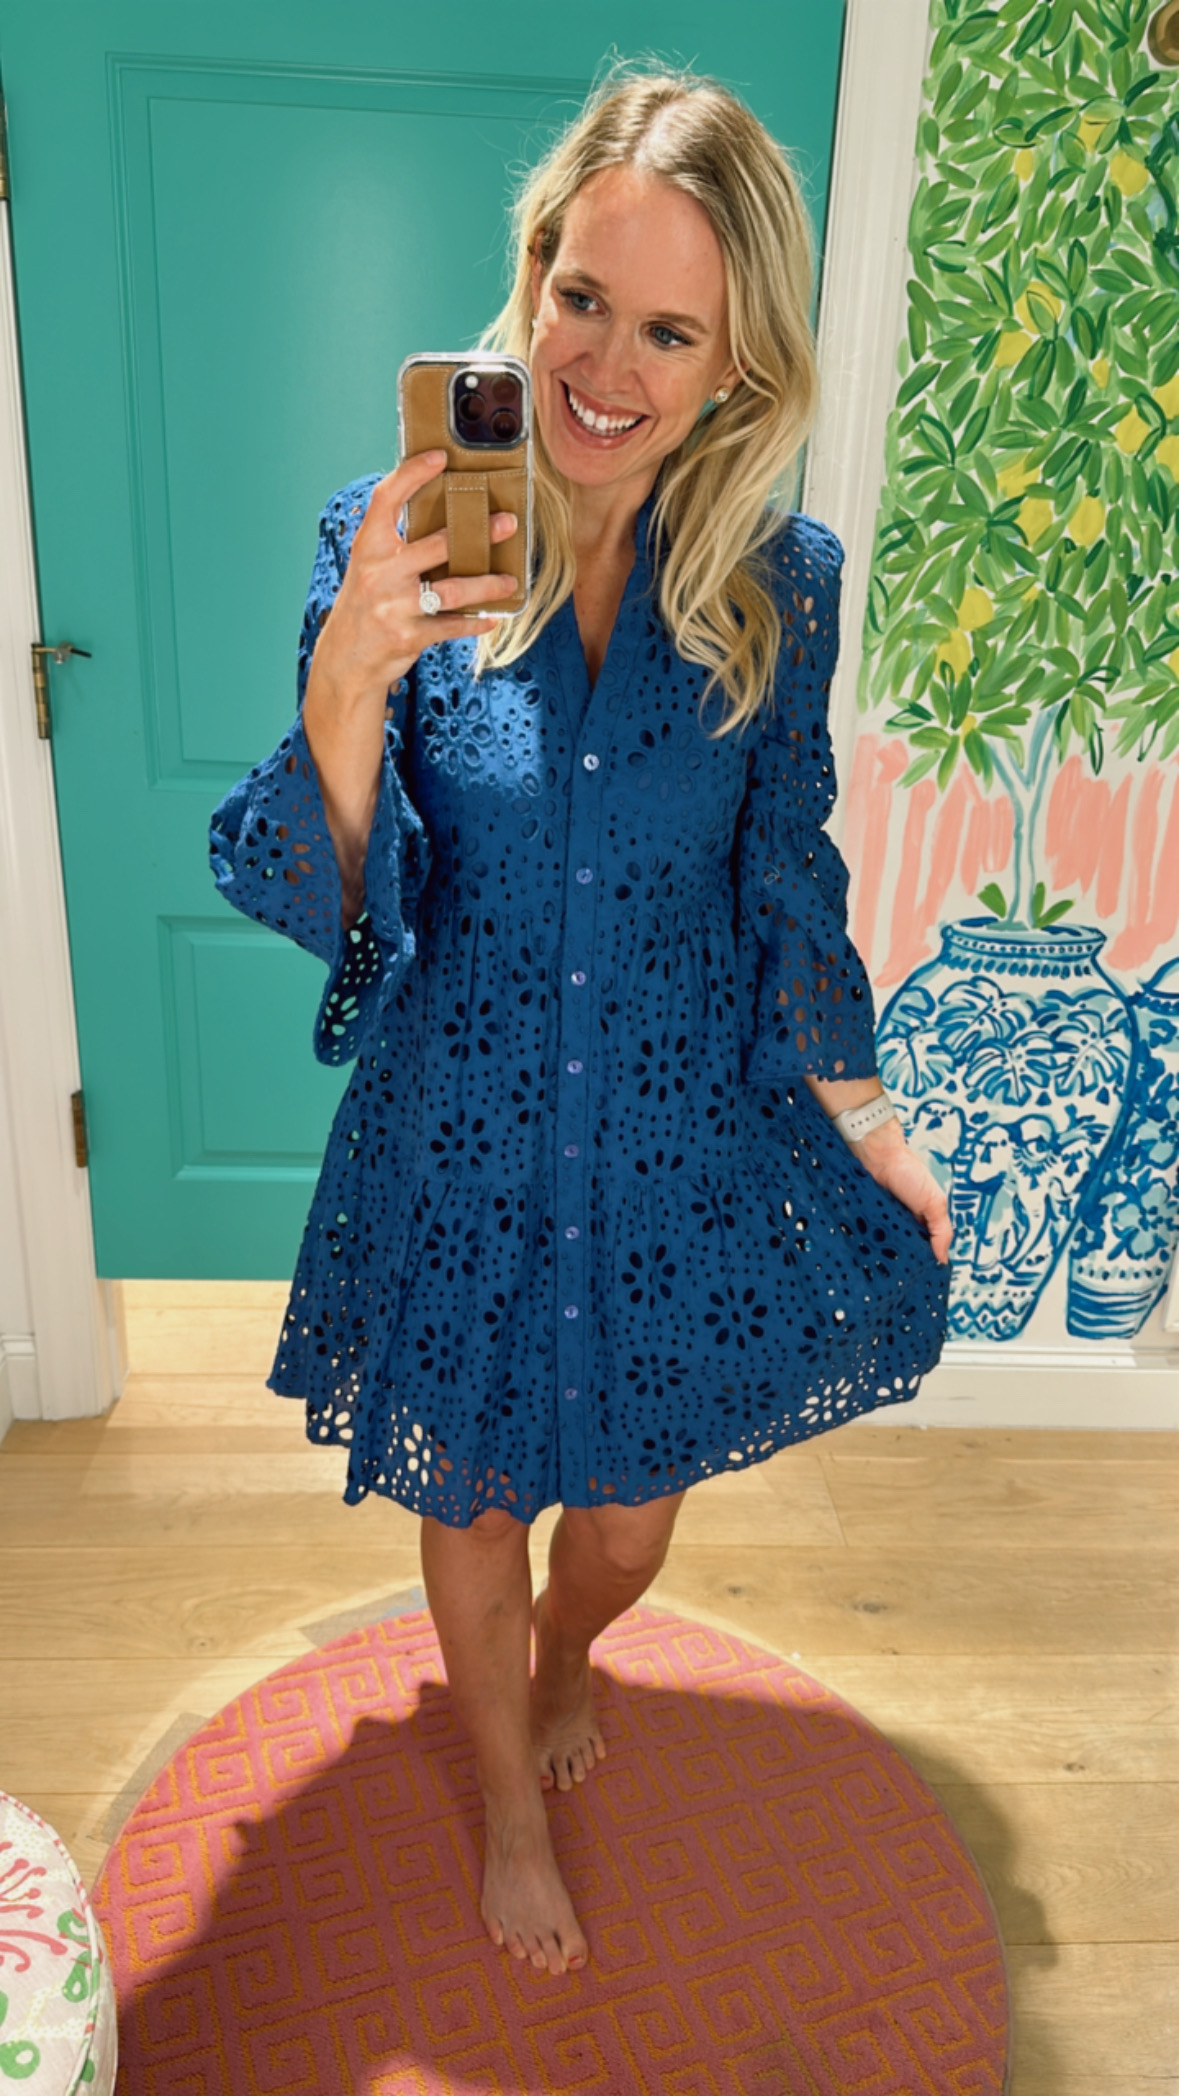 Lilly Pulitzer Sunshine Sale 2023 | This 2023 Summer Lilly Sunshine Sale Guide is packed with information on where to shop, styles, tips, possible dates and more! 